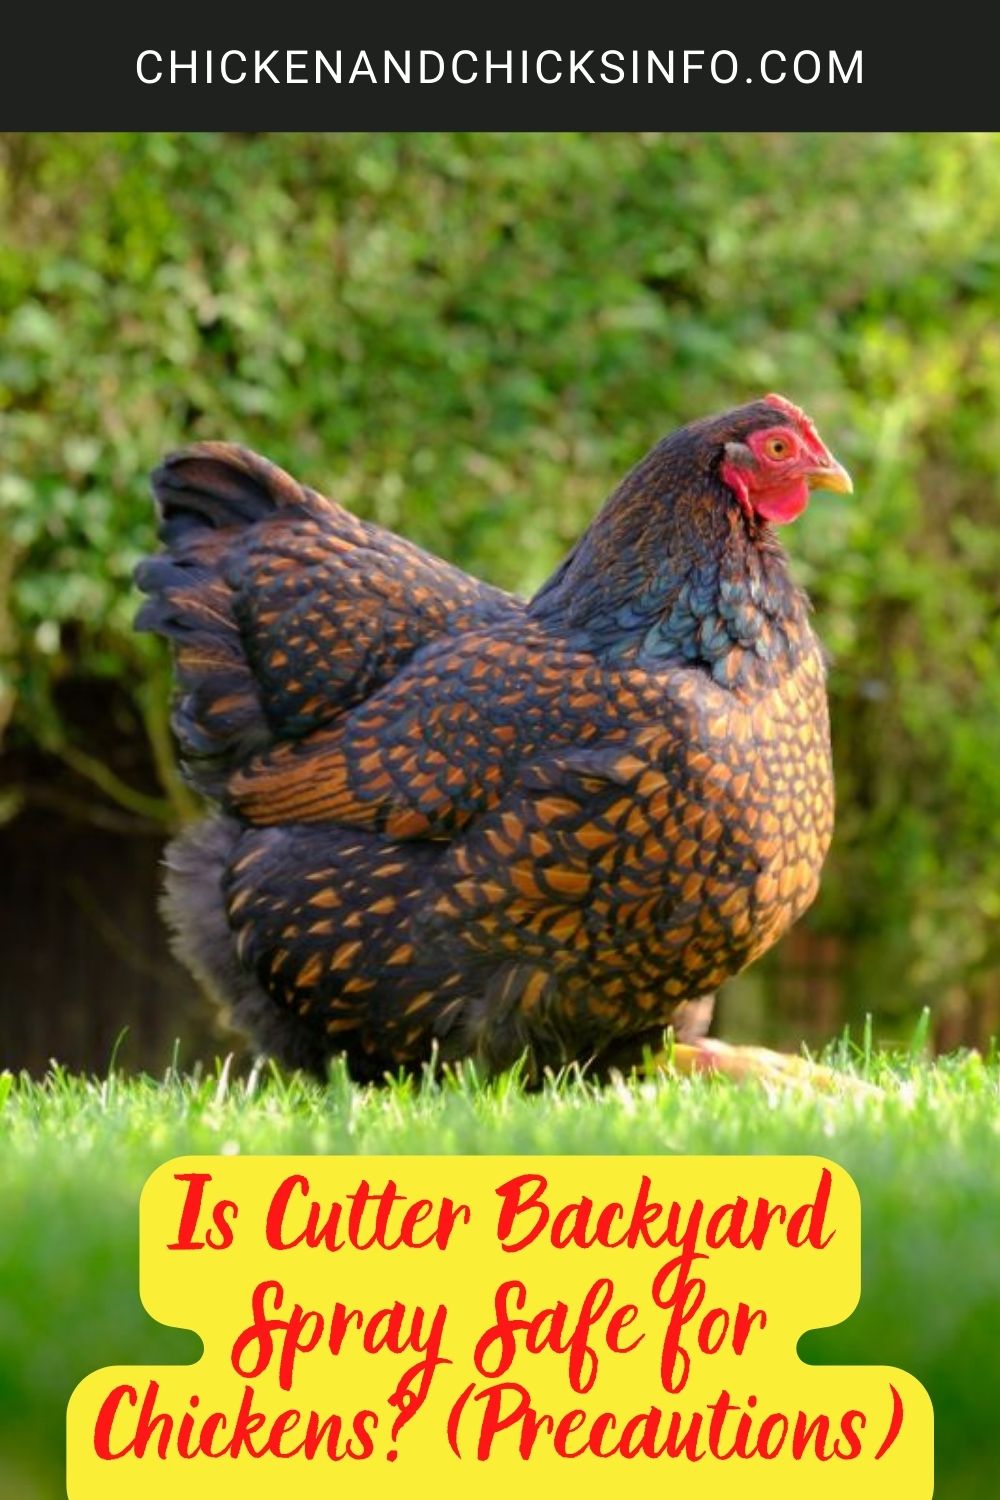 Is Cutter Backyard Spray Safe for Chickens? (Precautions) poster.
